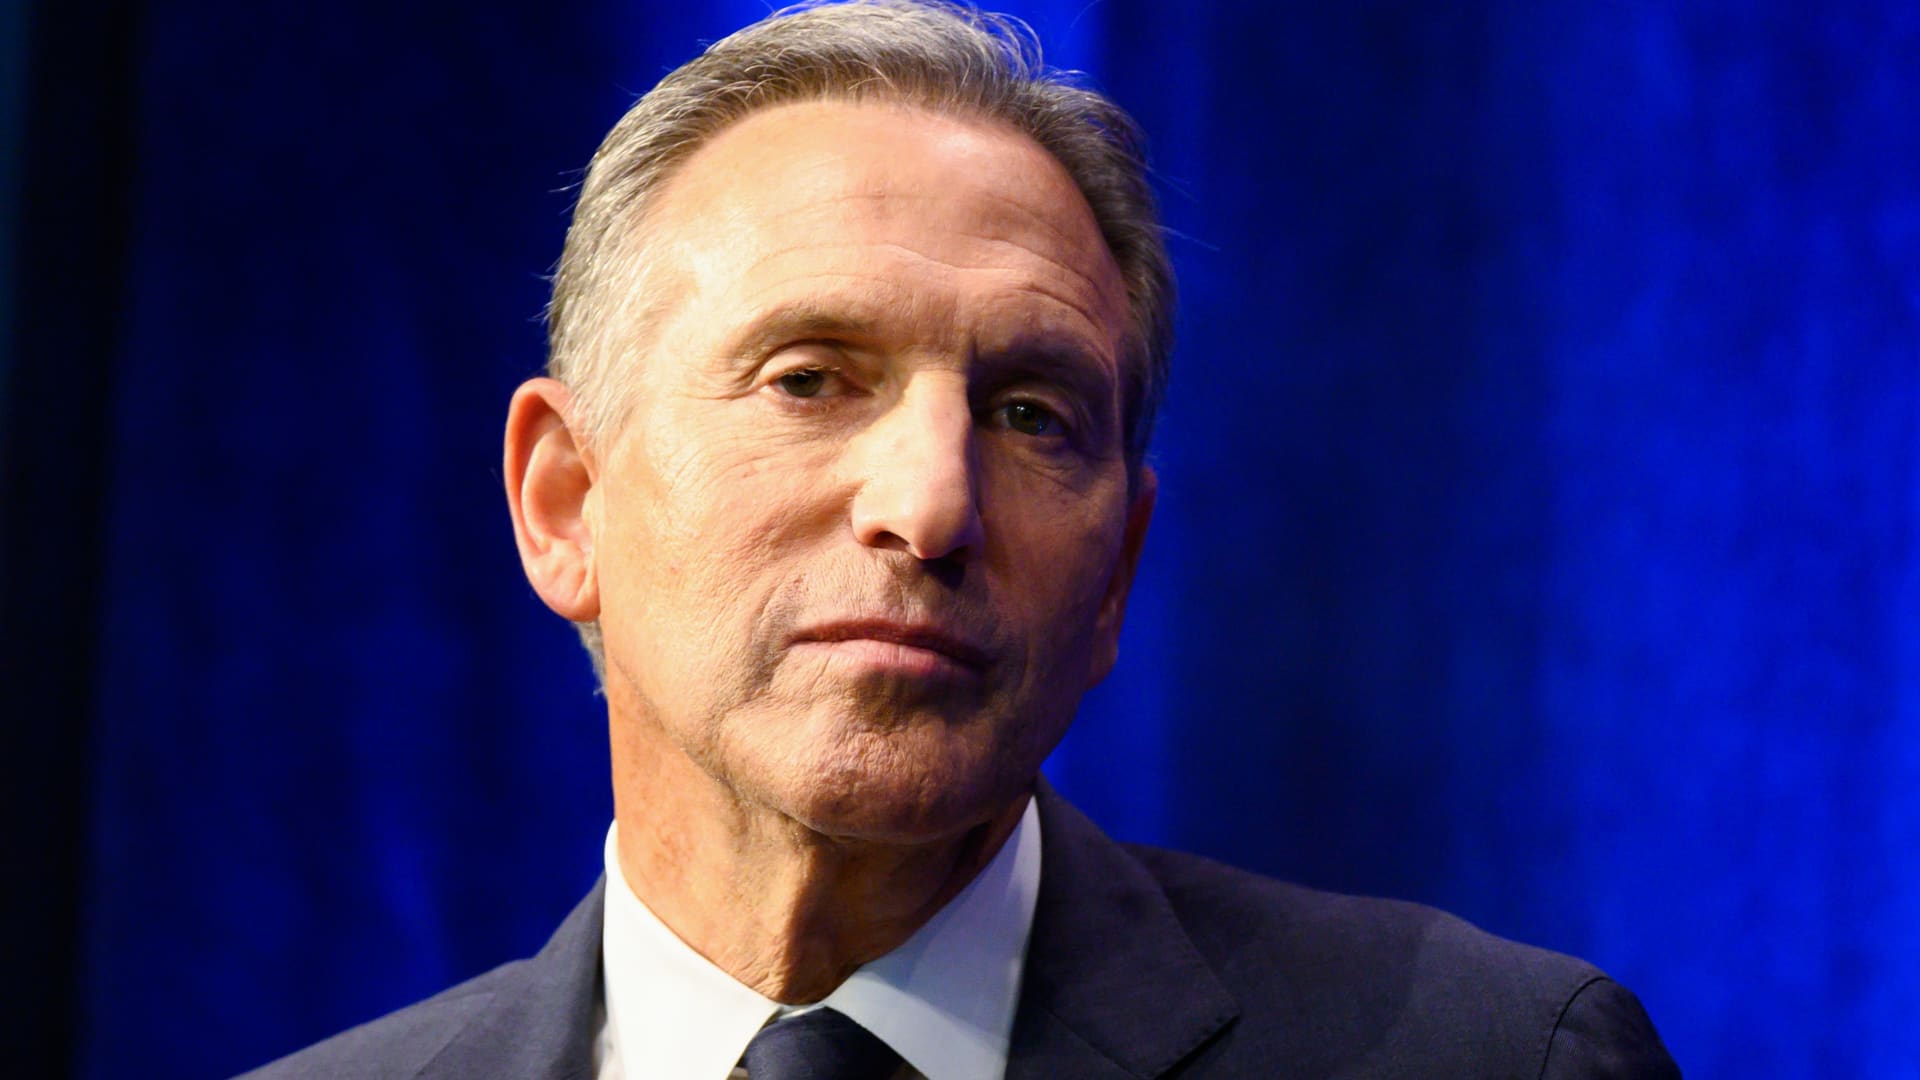 Former Chairman and CEO of Starbucks, Howard Schultz, speaks during the presentation of his book 'From The Ground Up' on January 28, 2019 in New York City.